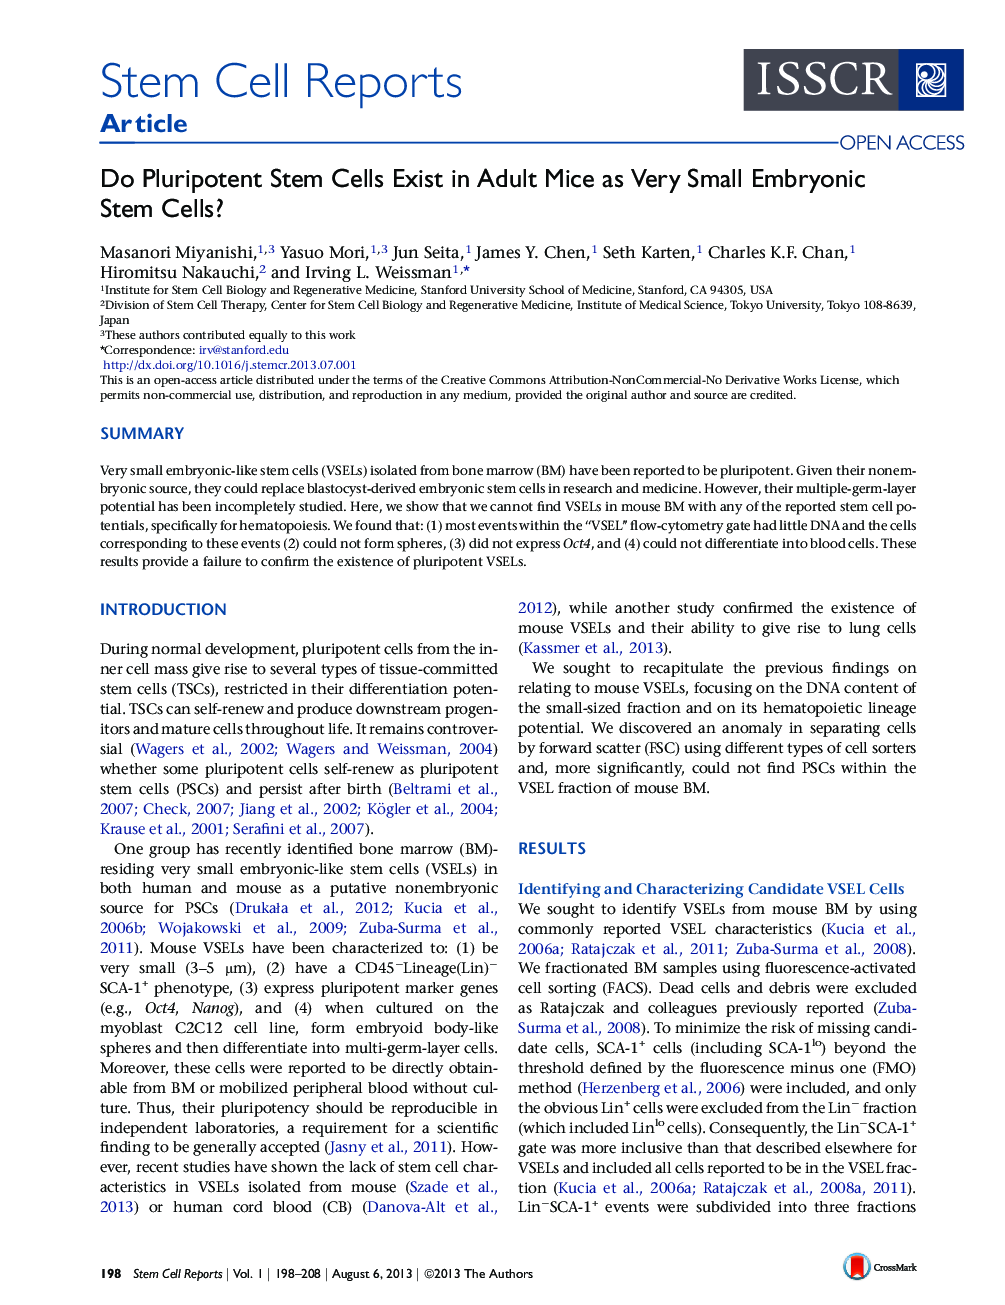 Do Pluripotent Stem Cells Exist in Adult Mice as Very Small Embryonic Stem Cells? 